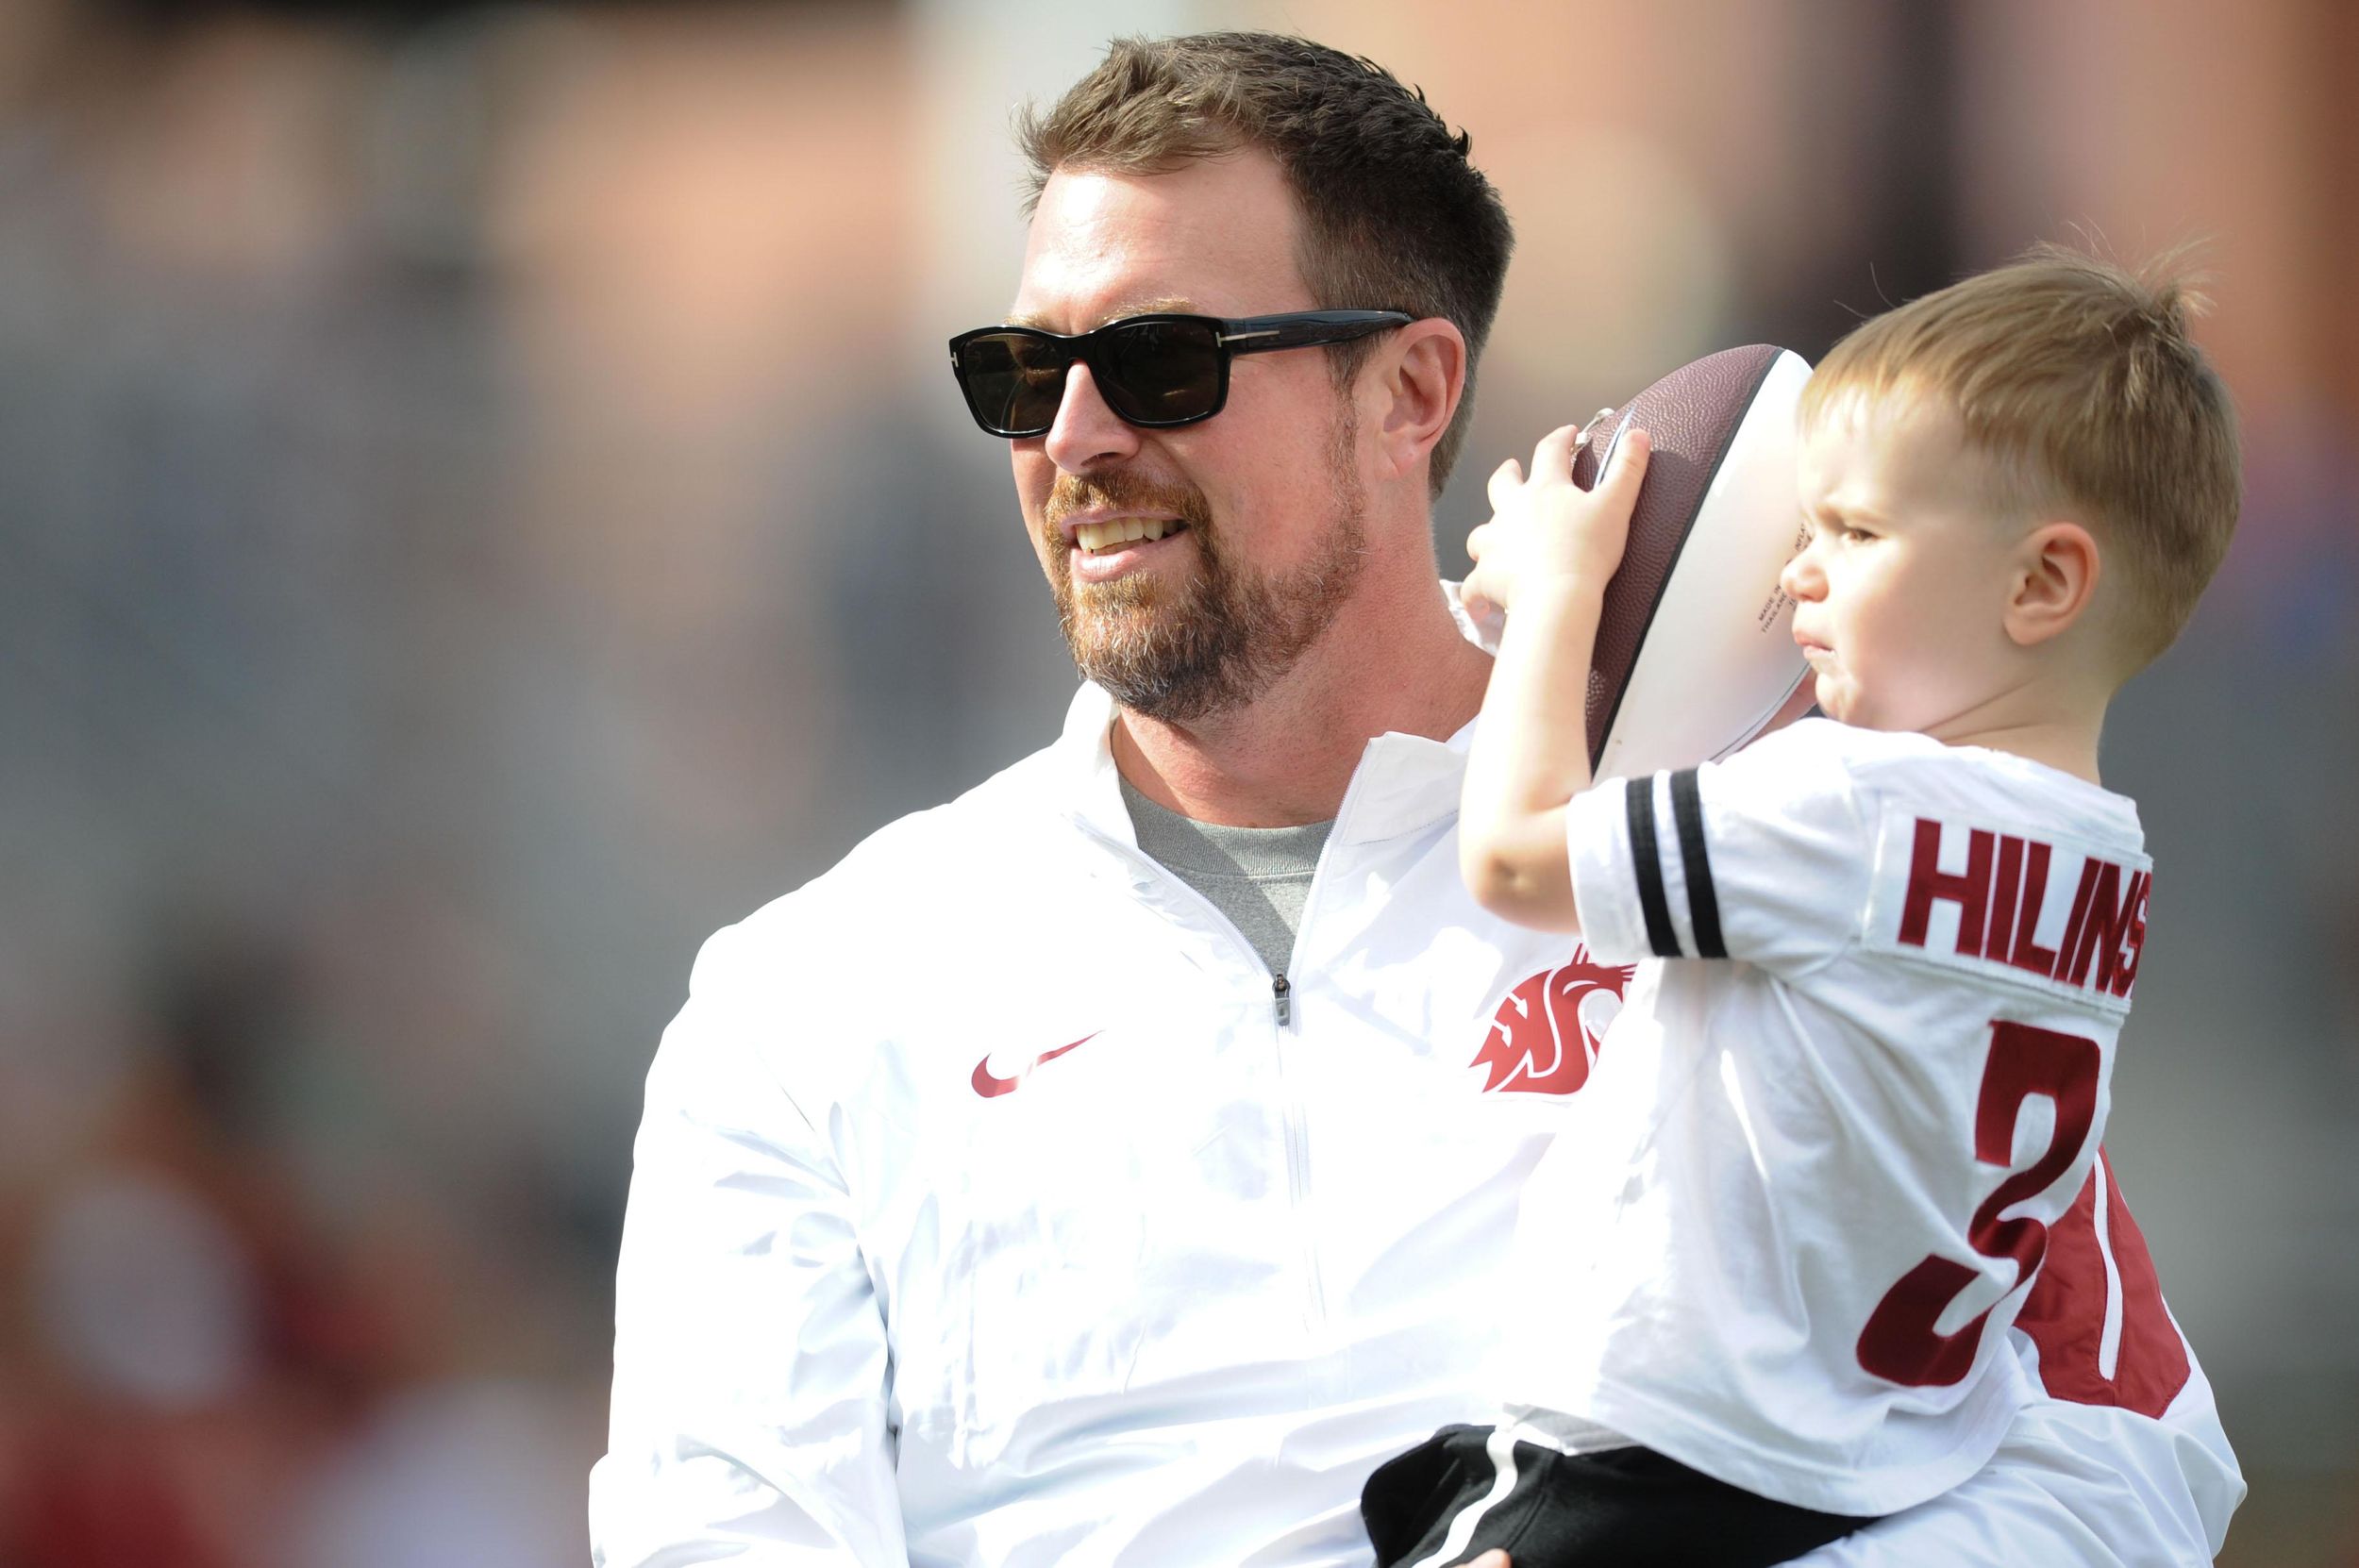 Cougfan at 20: Ryan Leaf talks Apple Cups, addiction and more